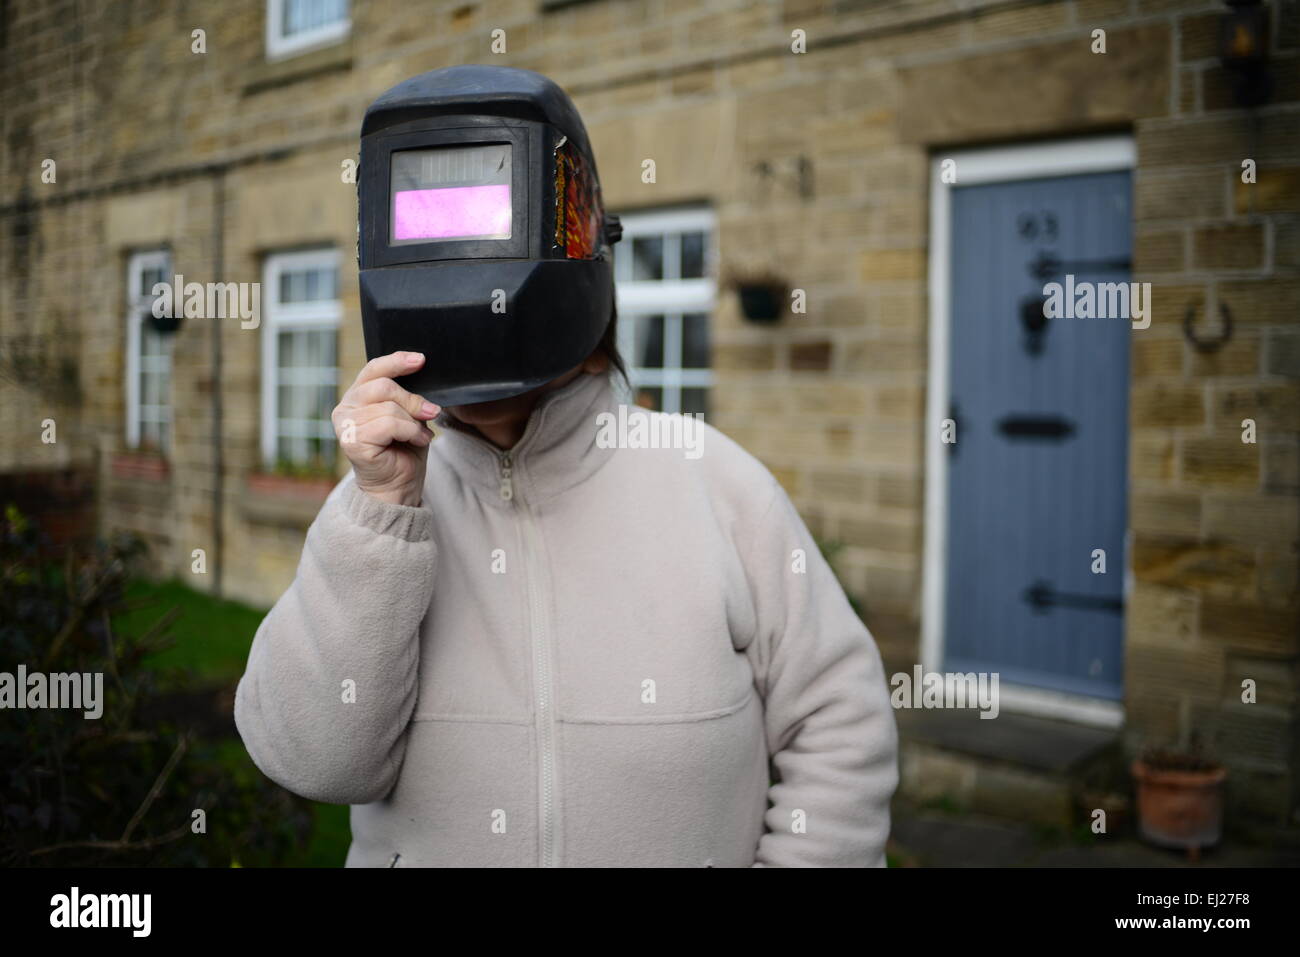 Barnsley, UK. 20th March 2015. 72 Year old Glenys Goodwin with a welders mask she used to view the 2015 partial solar eclipse. Stock Photo